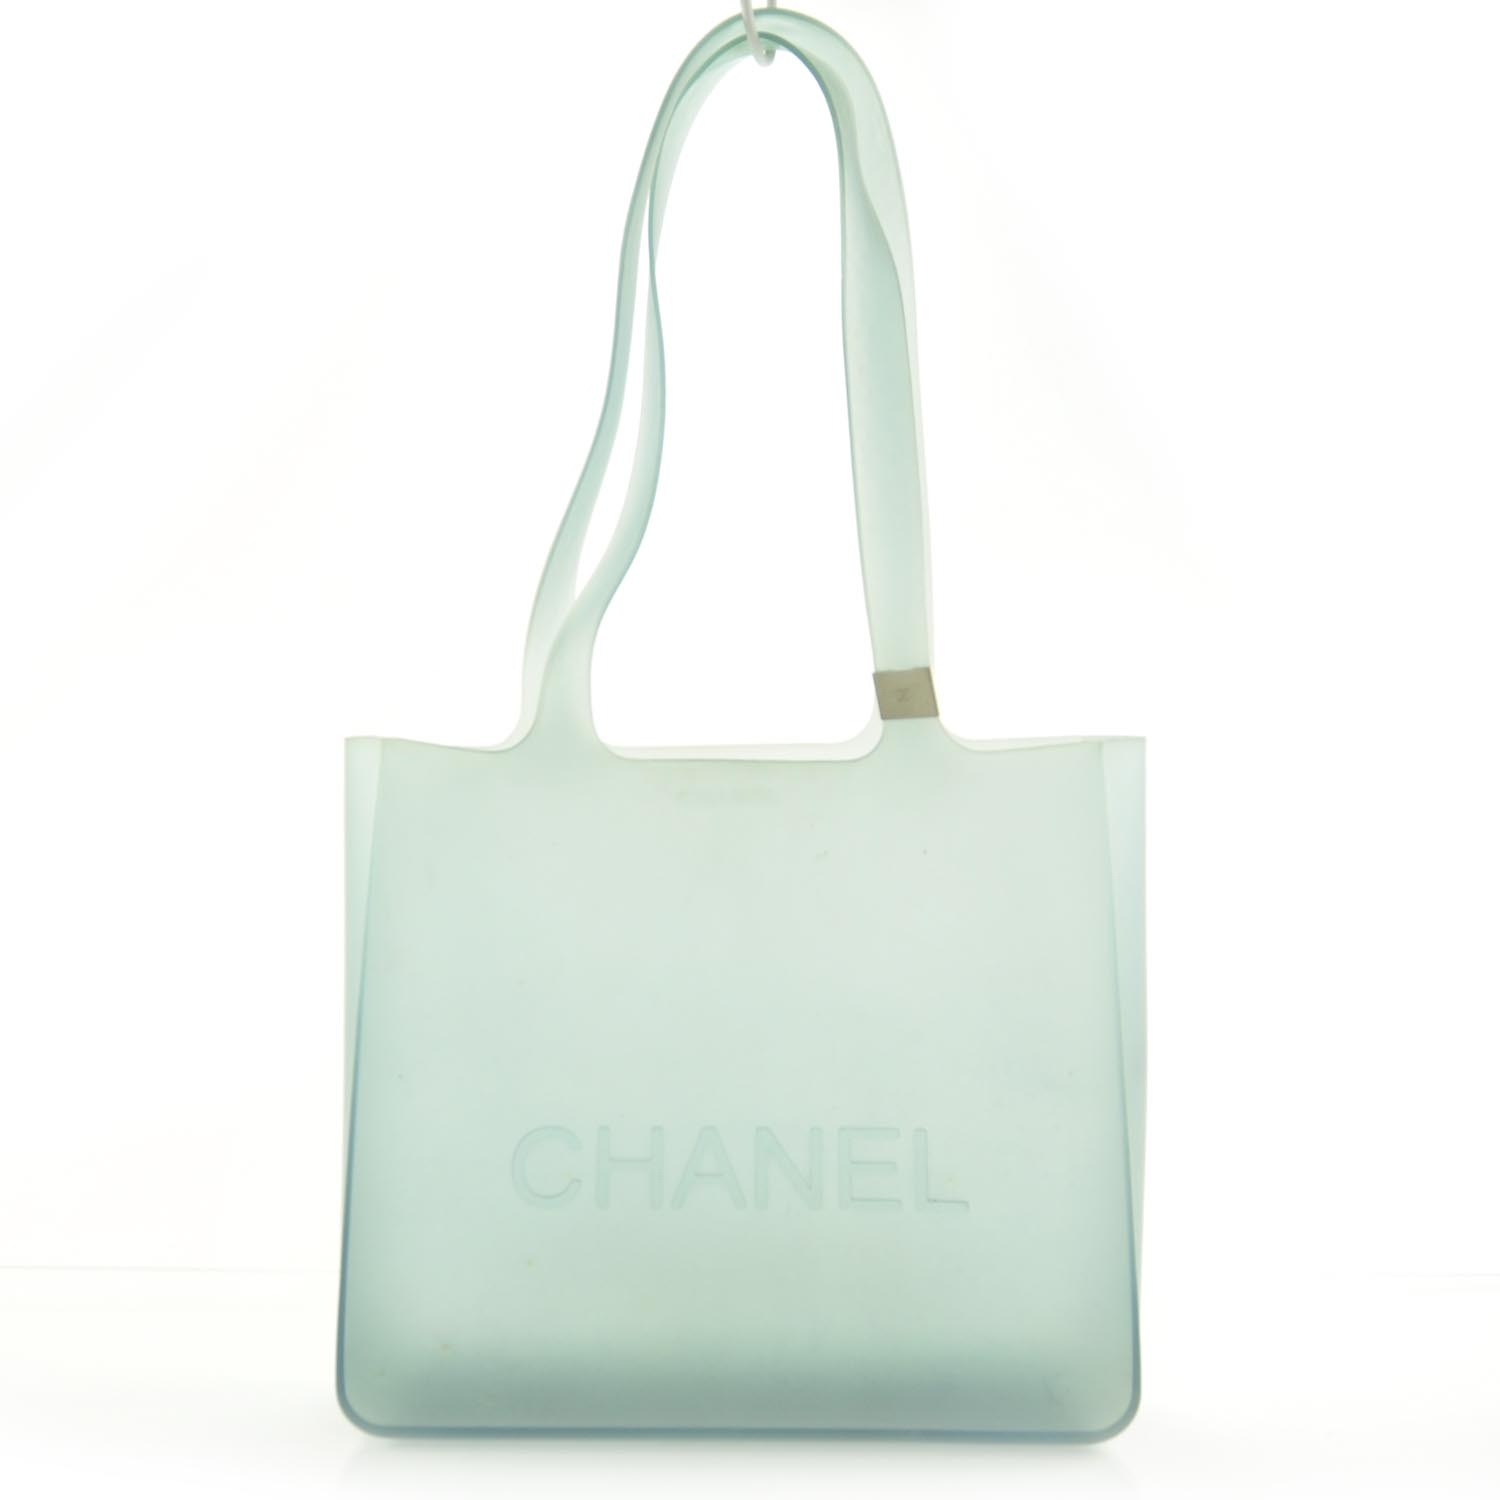 CHANEL Jelly Rubber Tote Green 27580